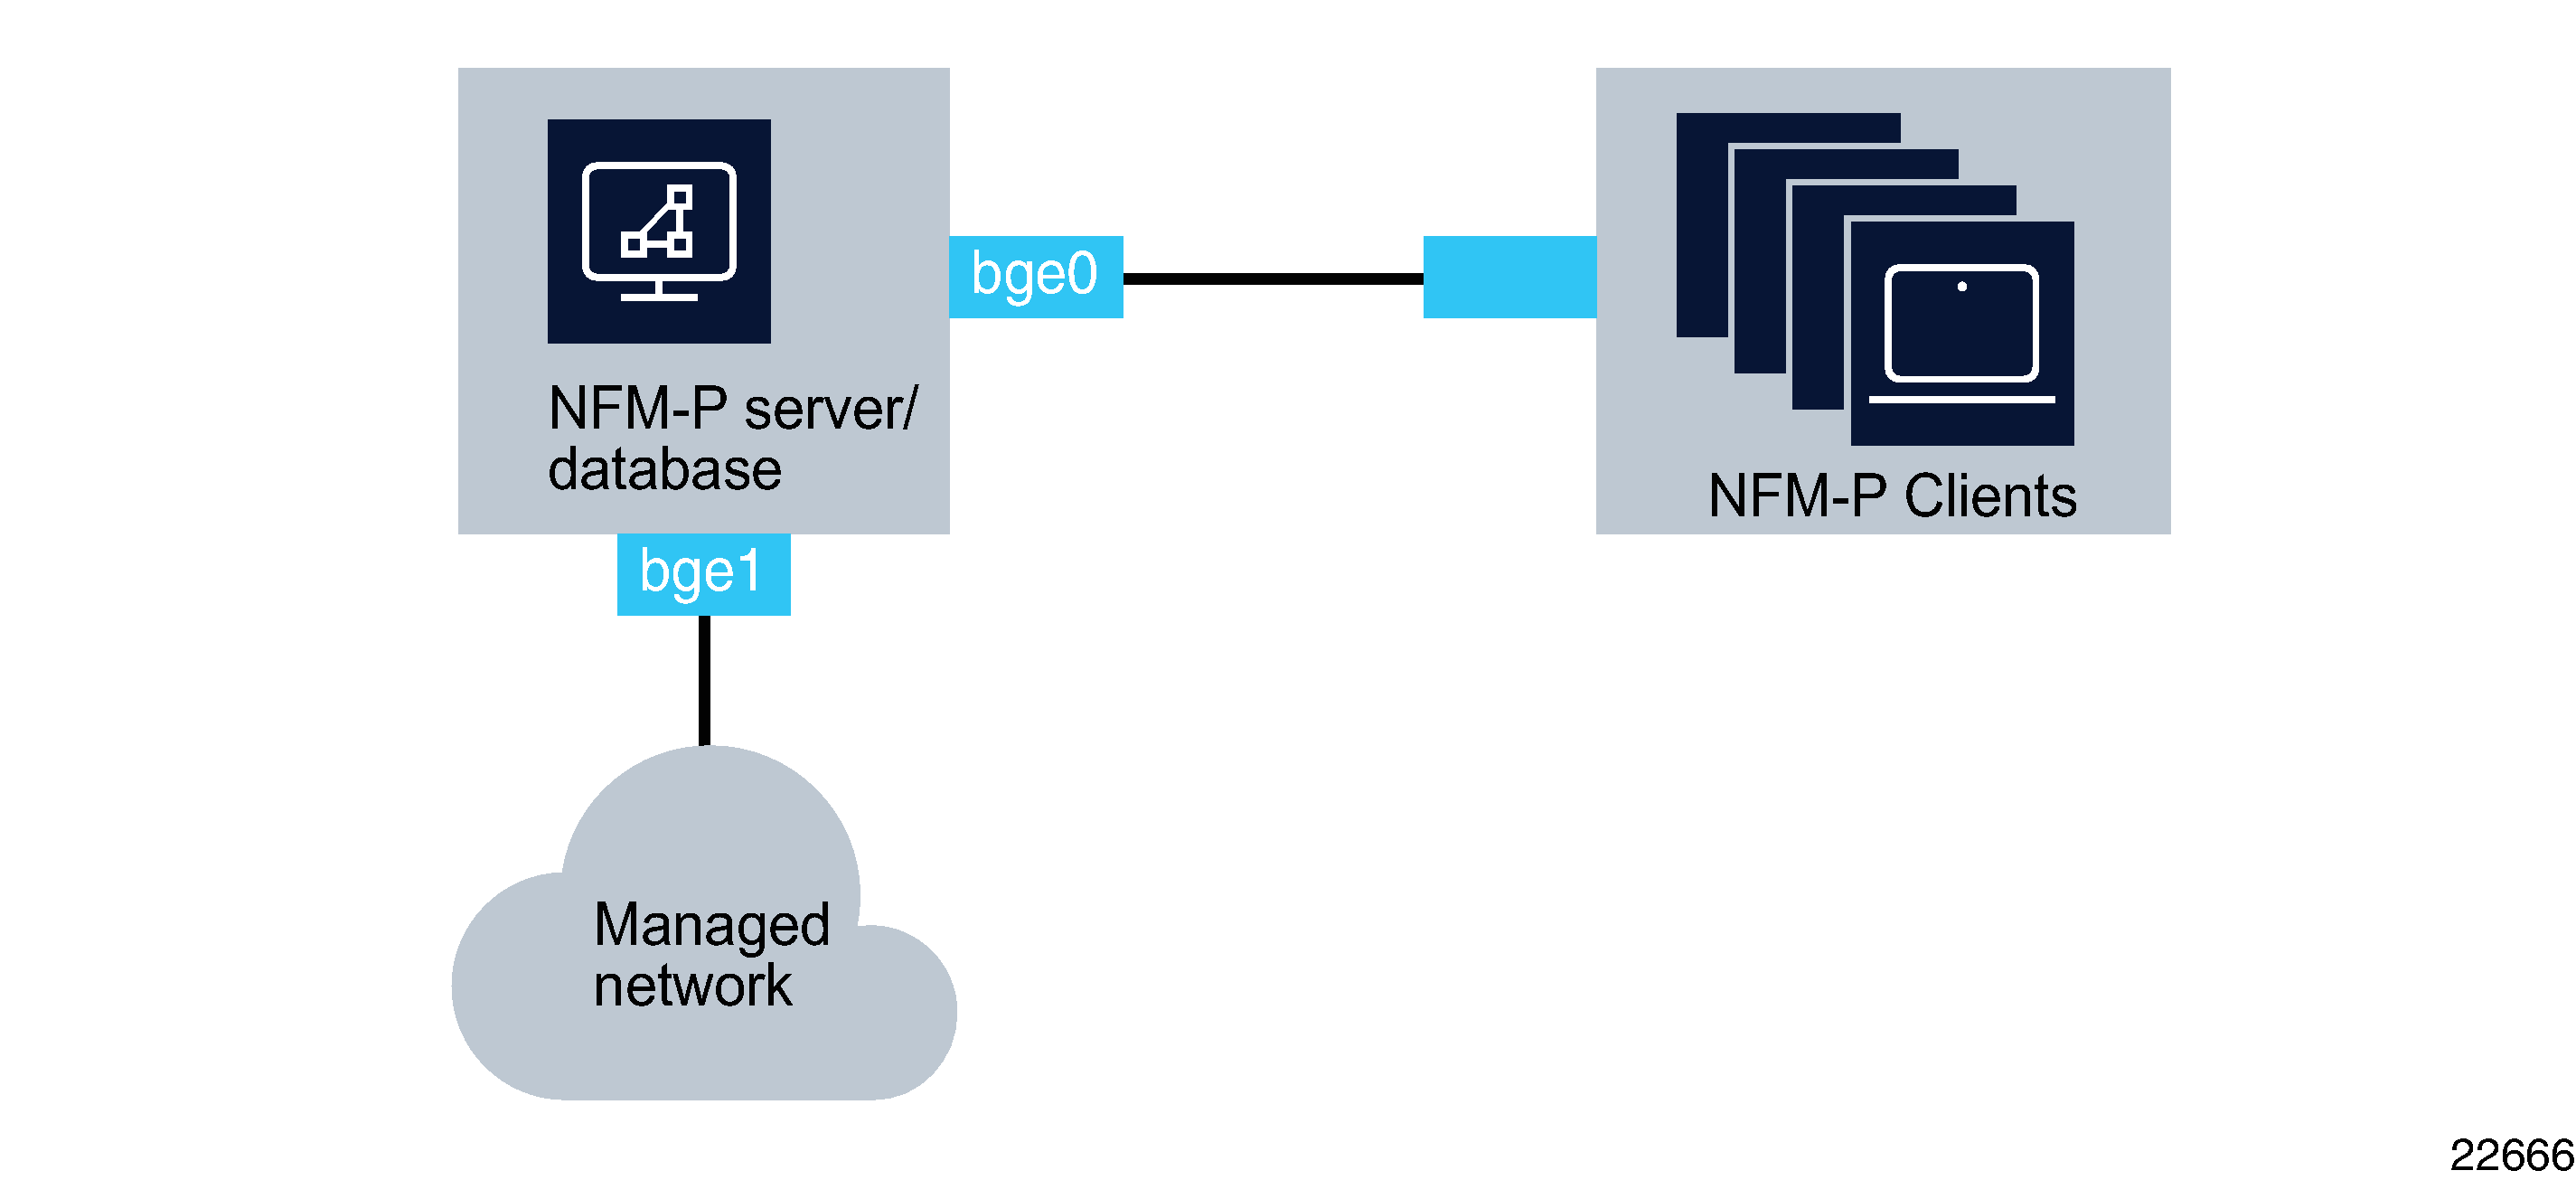 Collocated NFM-P server/database deployment with multiple network interfaces